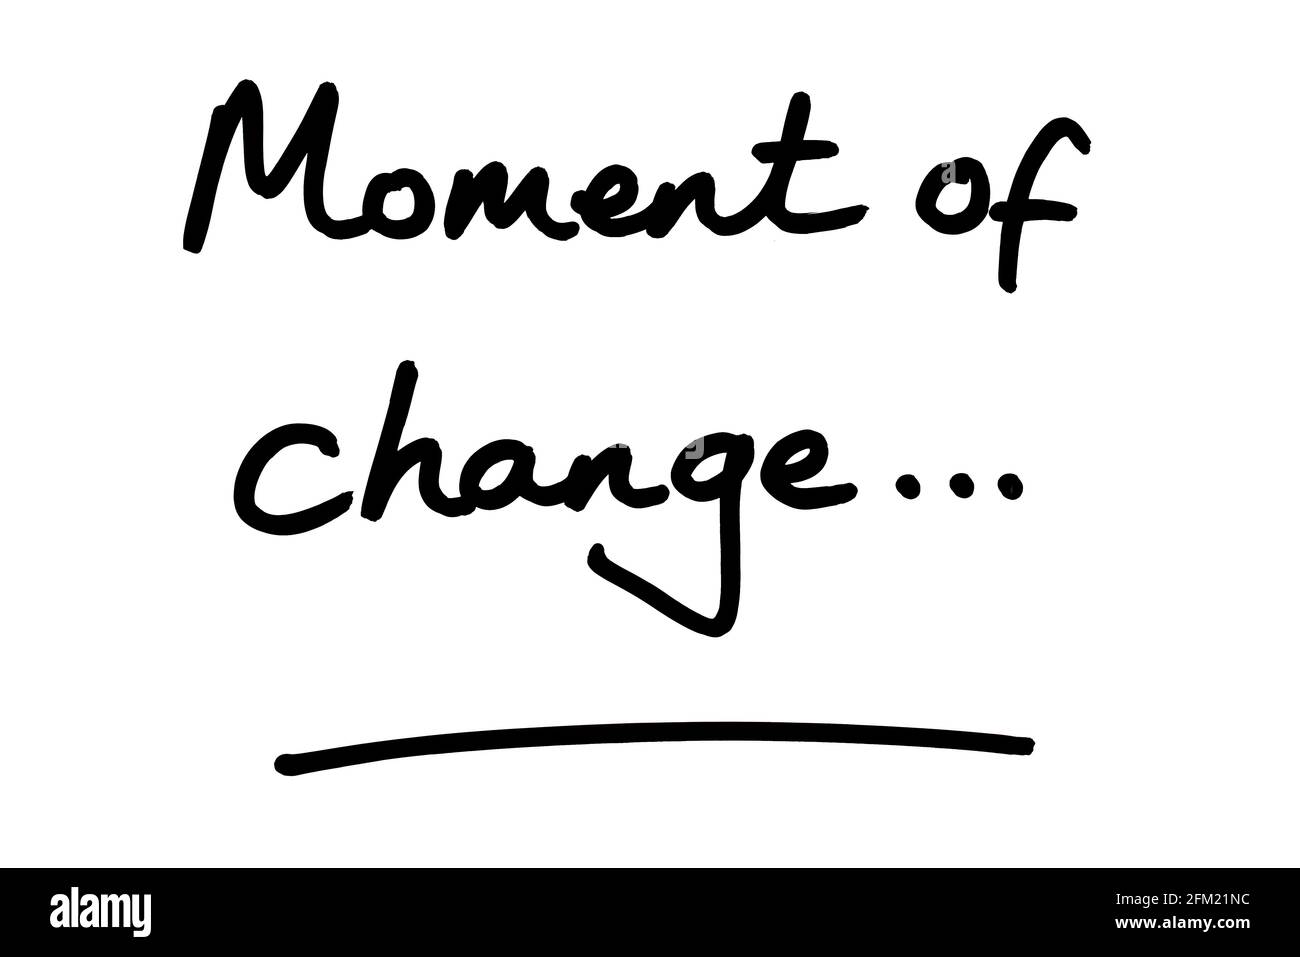 Moment of change… handwritten on a white background. Stock Photo